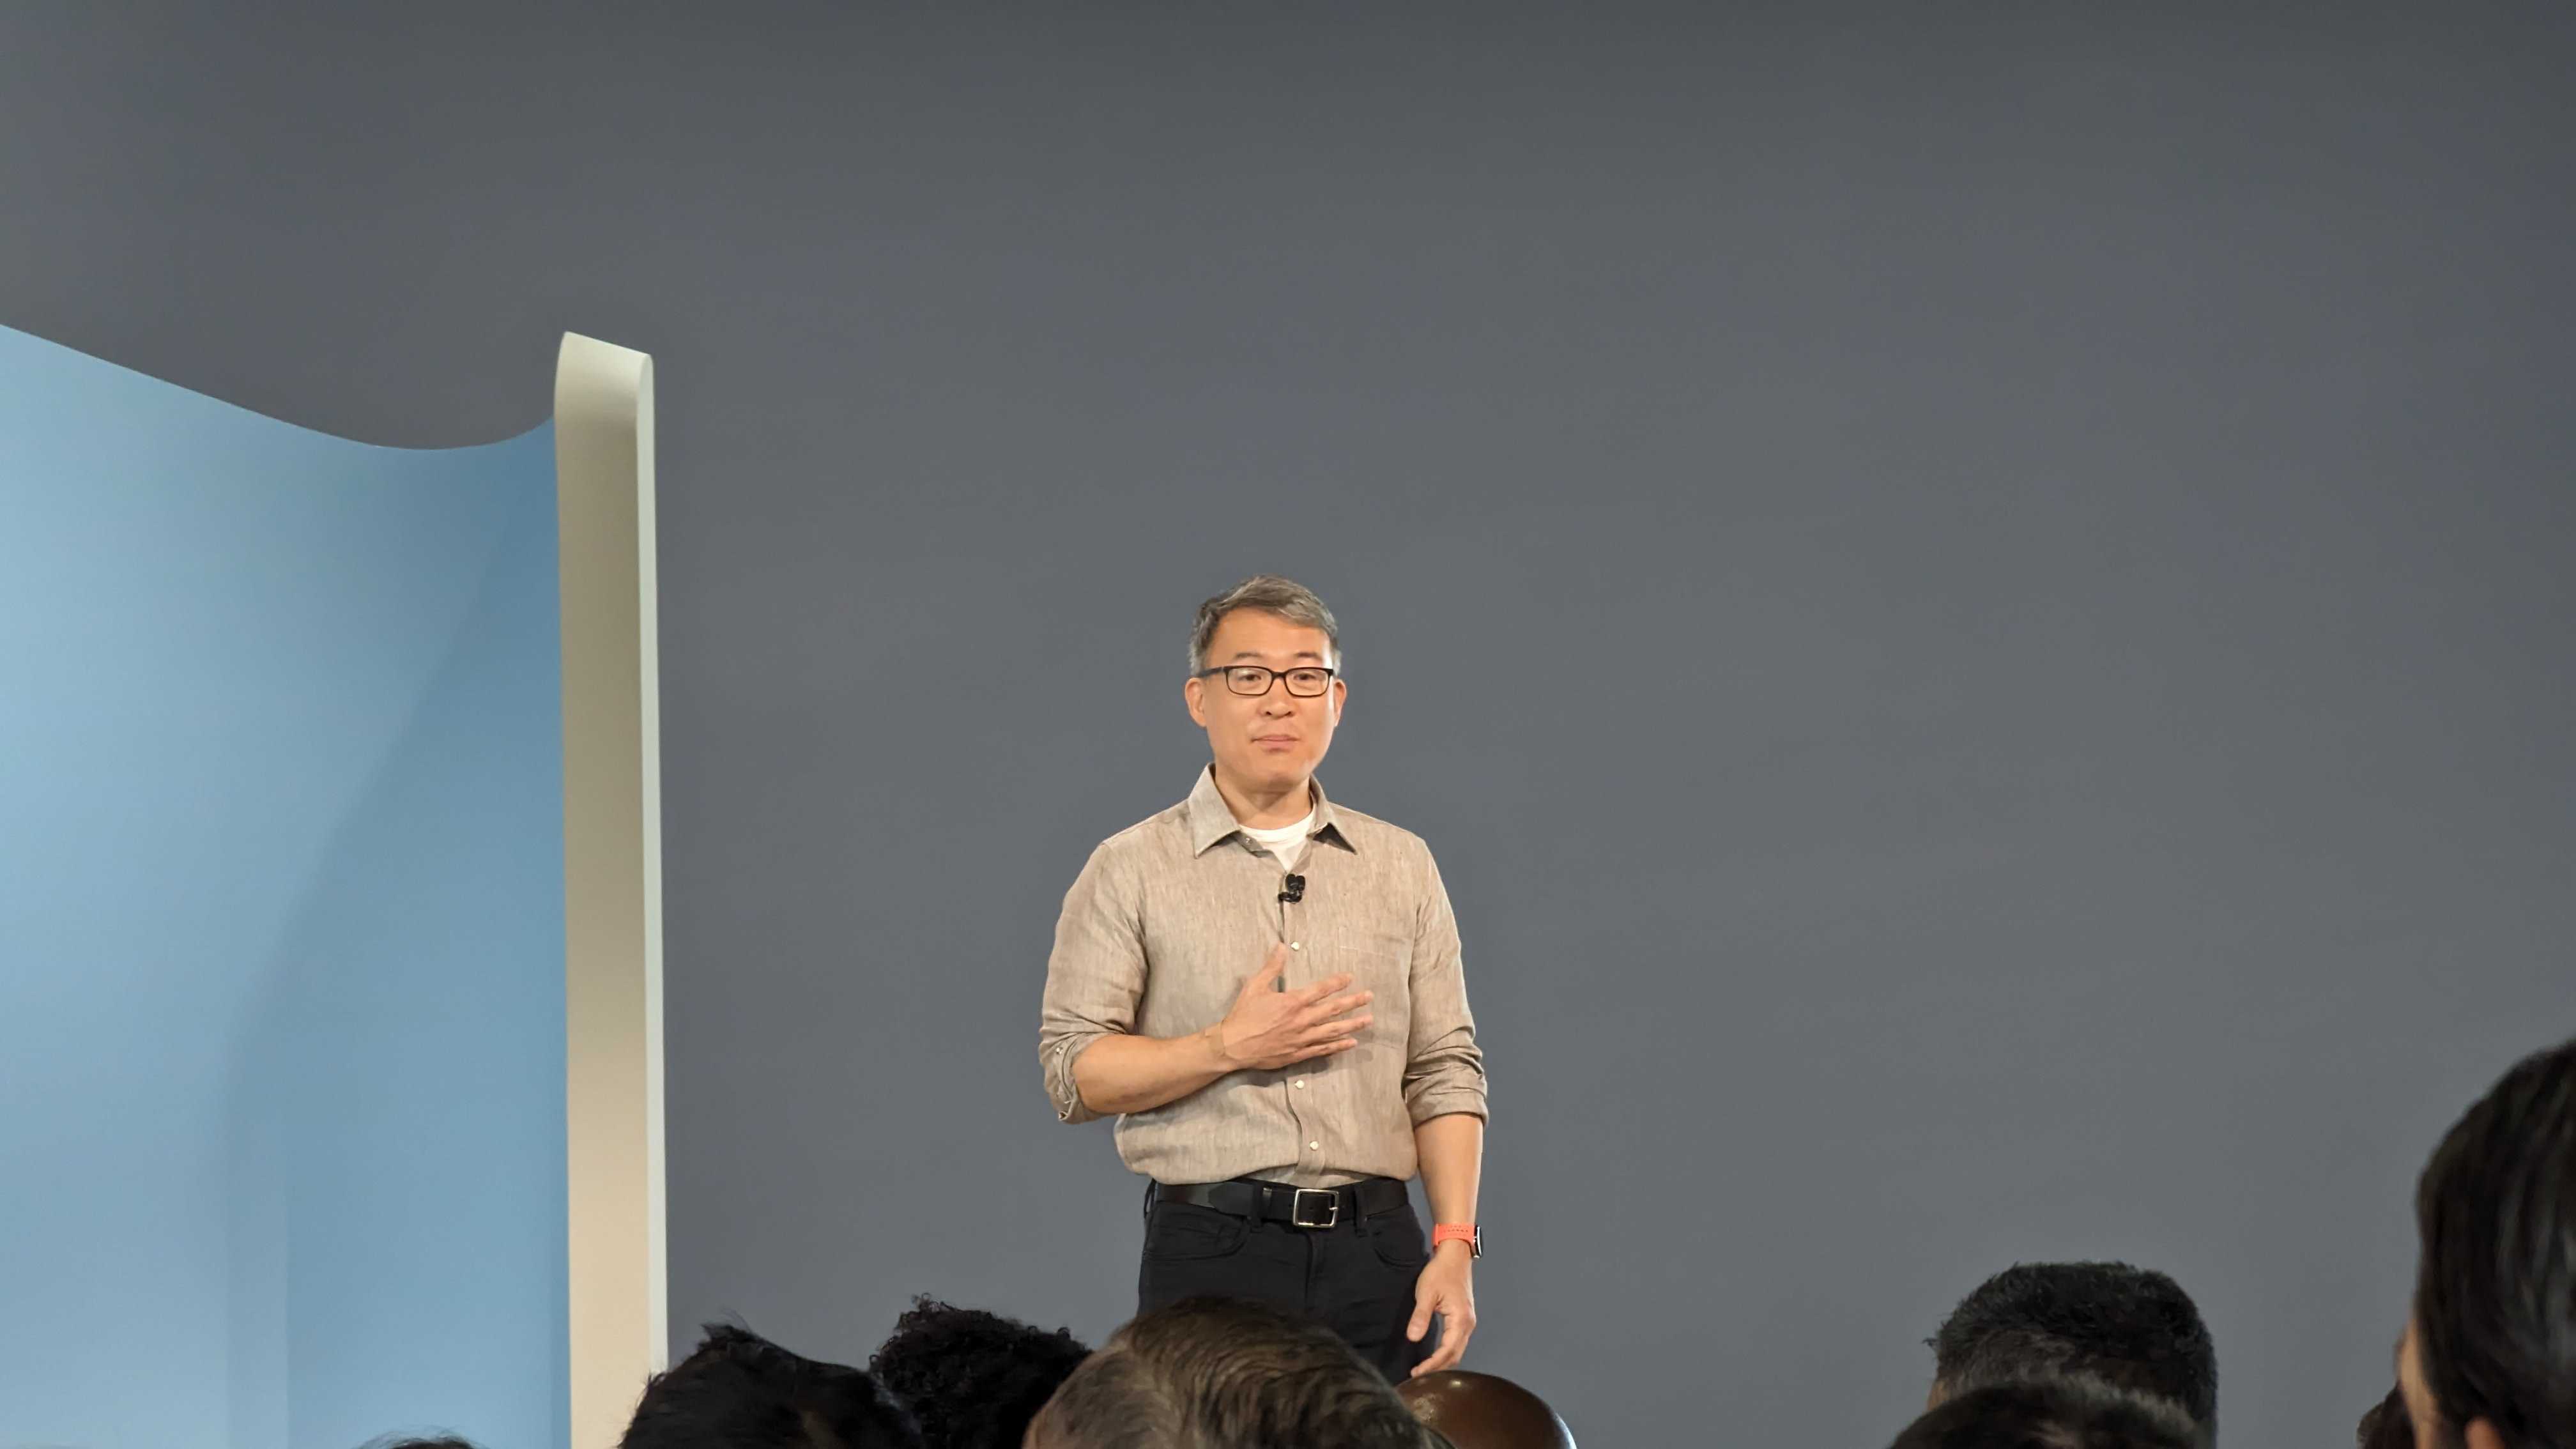 James Park of Fitbit at Made by Google Event